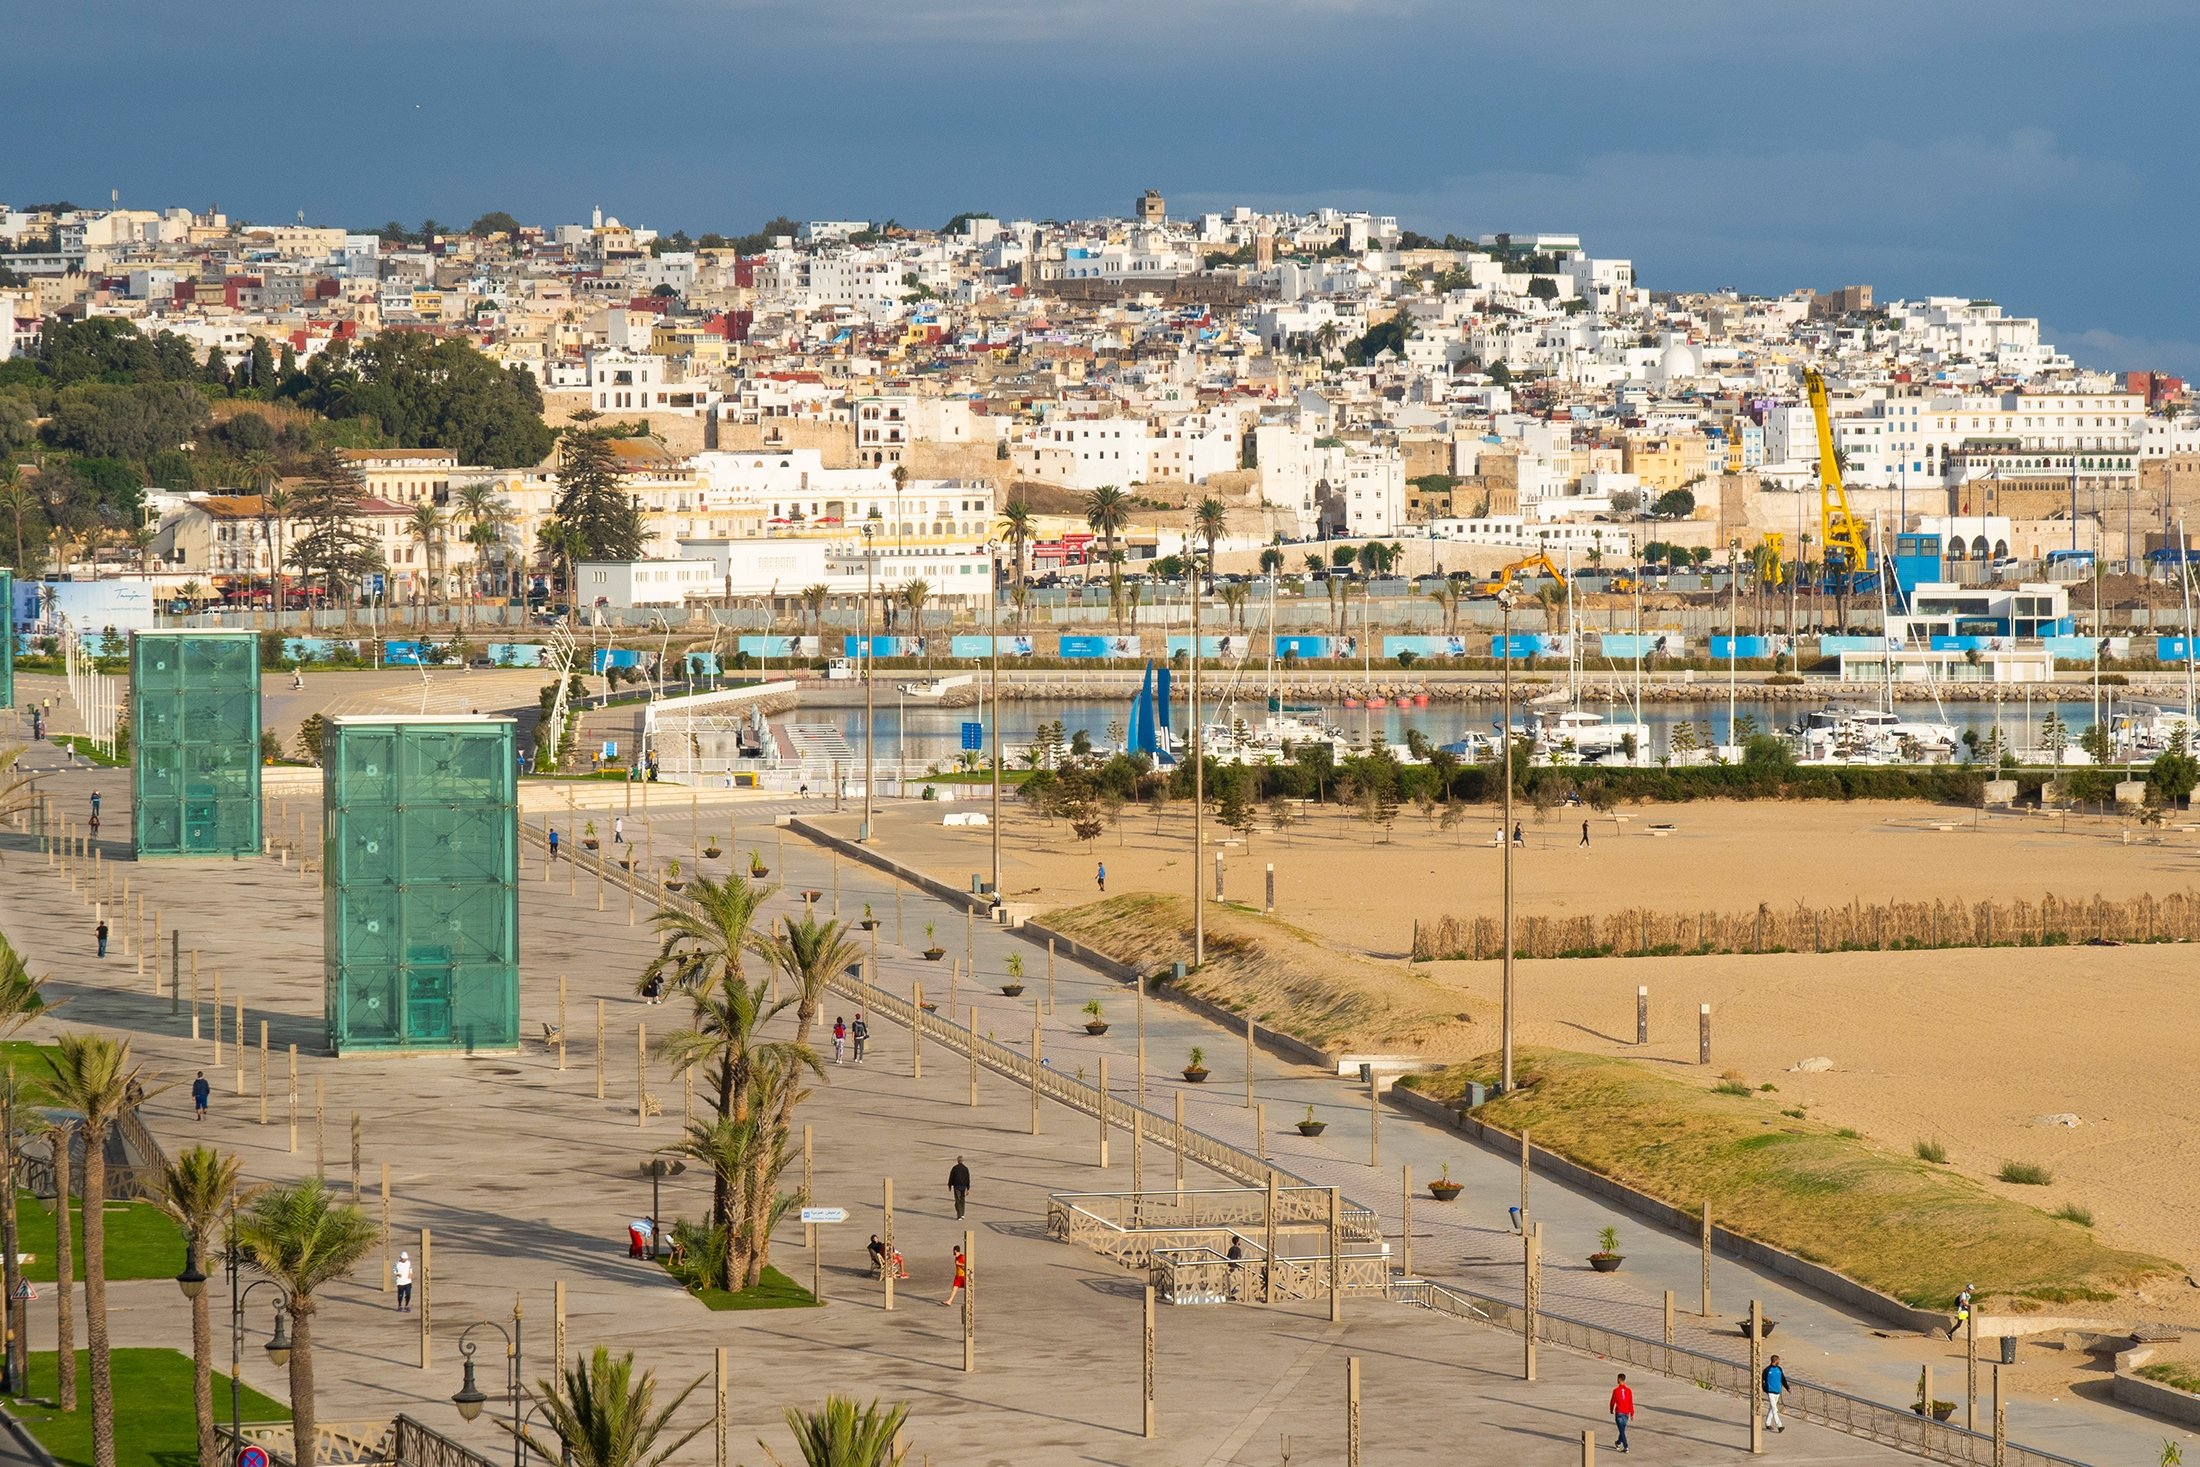 Tangier, the Moroccan city by the sea, now has around a million inhabitants. (dpa Photo)